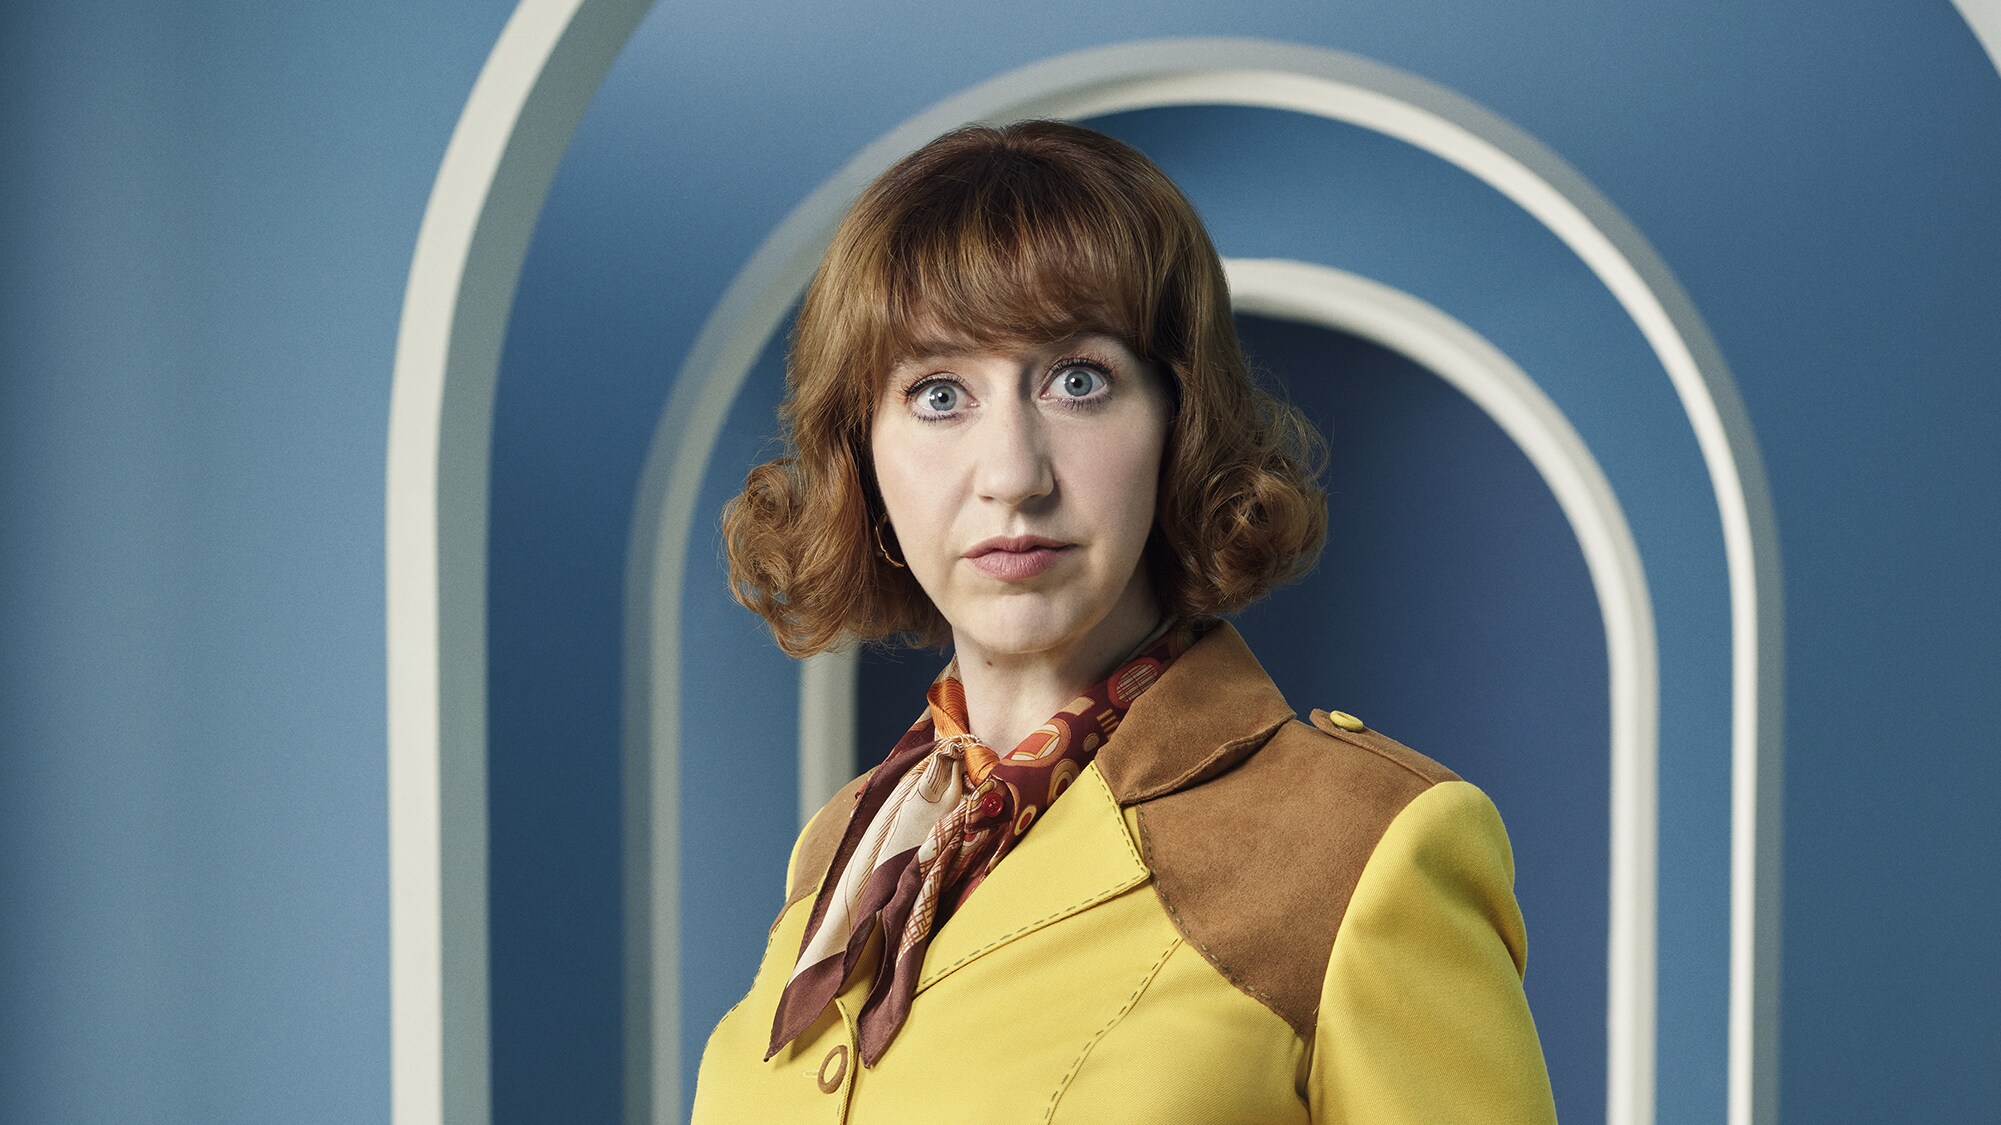 THE MYSTERIOUS BENEDICT SOCIETY - Disney’s “The Mysterious Benedict Society” stars Kristen Schaal as Number Two. (Disney/Brendan Meadows)